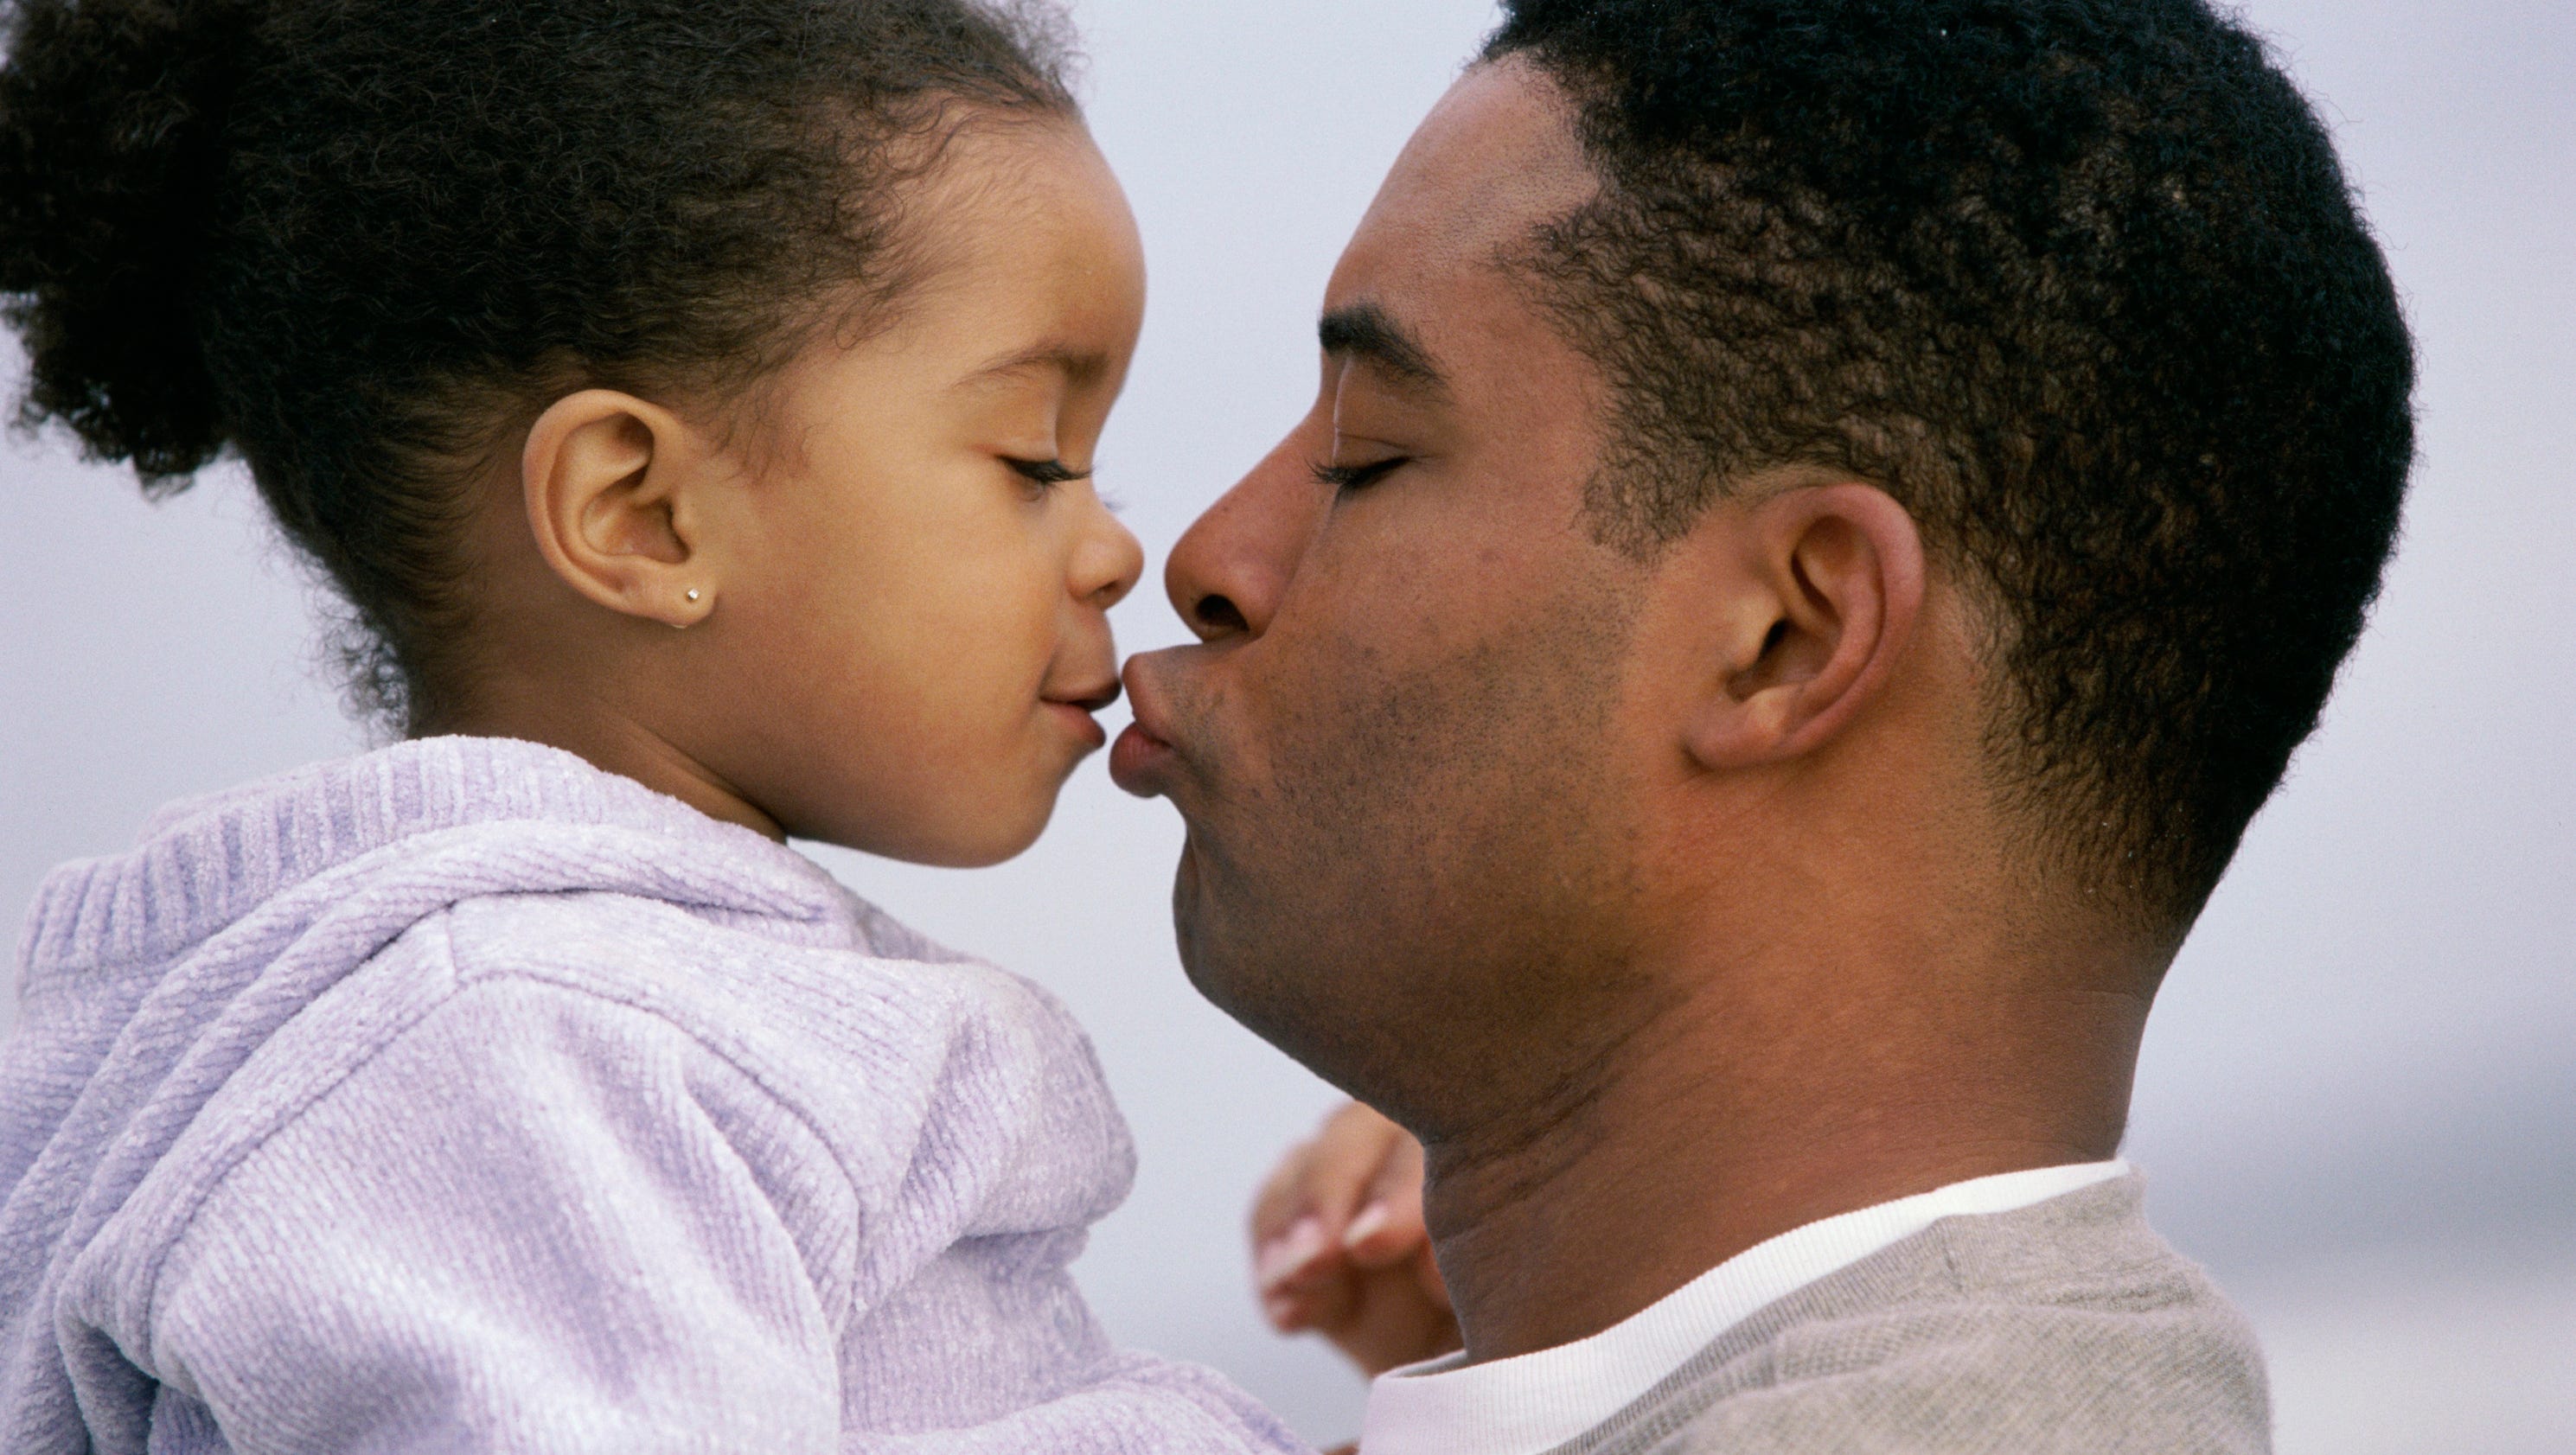 SOUND OFF: Kiss your kid on the lips or no?